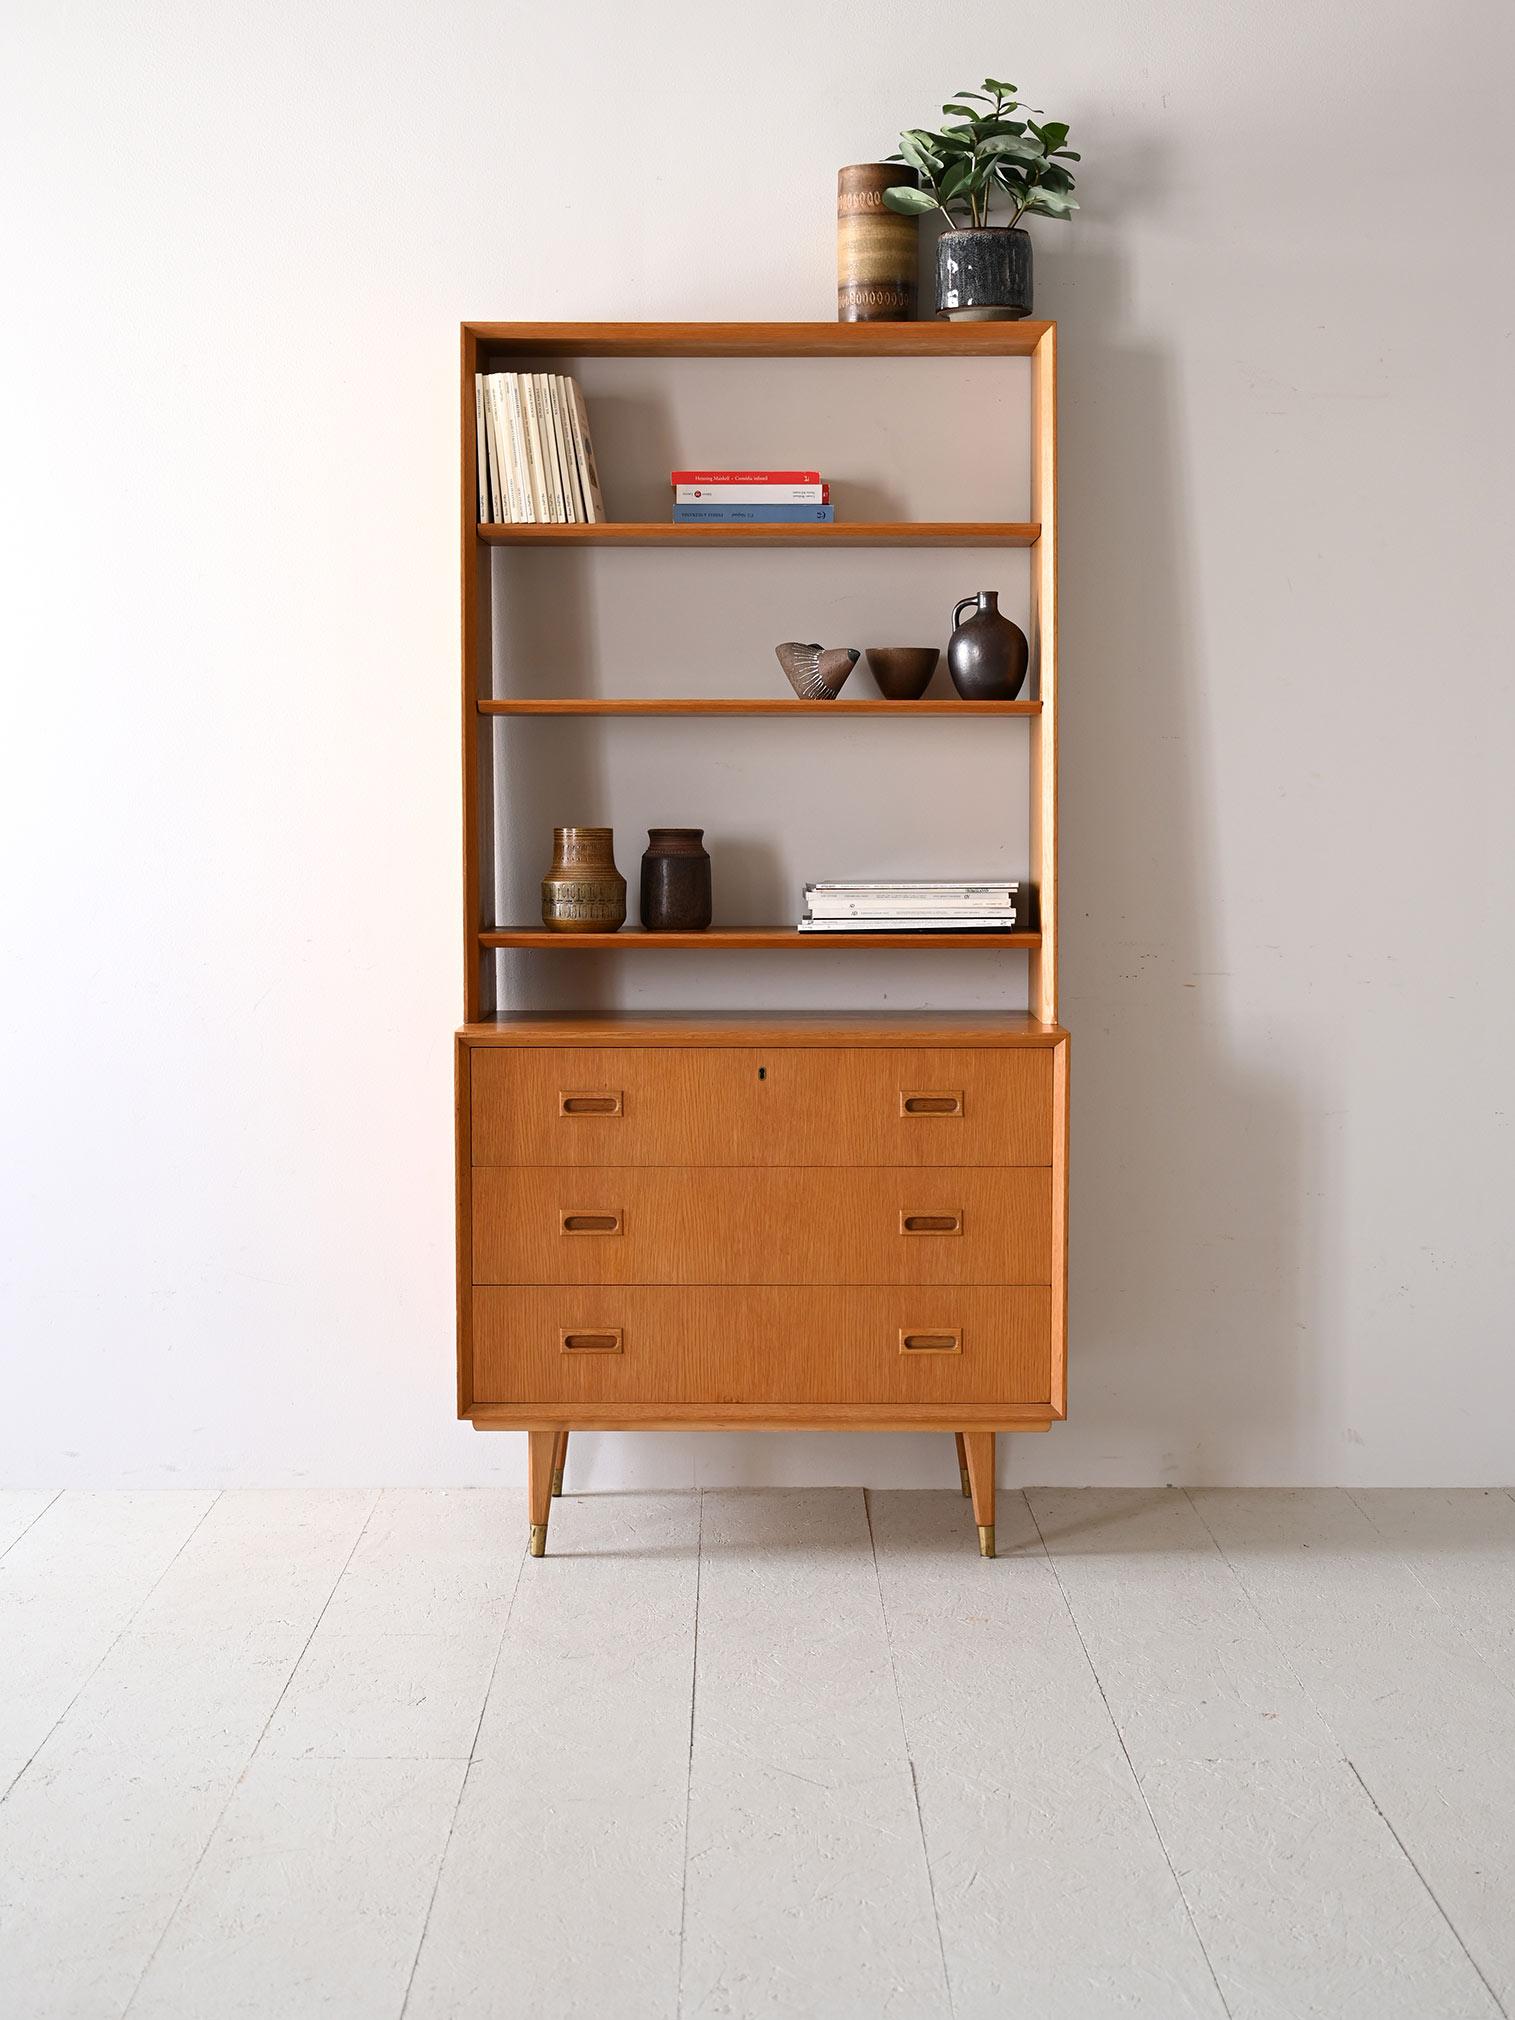 Nordic oak bookcase, dating from the 1960s, combines simplicity of design with everyday functionality.
The cabinet has three drawers with carved wooden handles.
The open, airy upper shelves provide ample space for books or decorative items, while